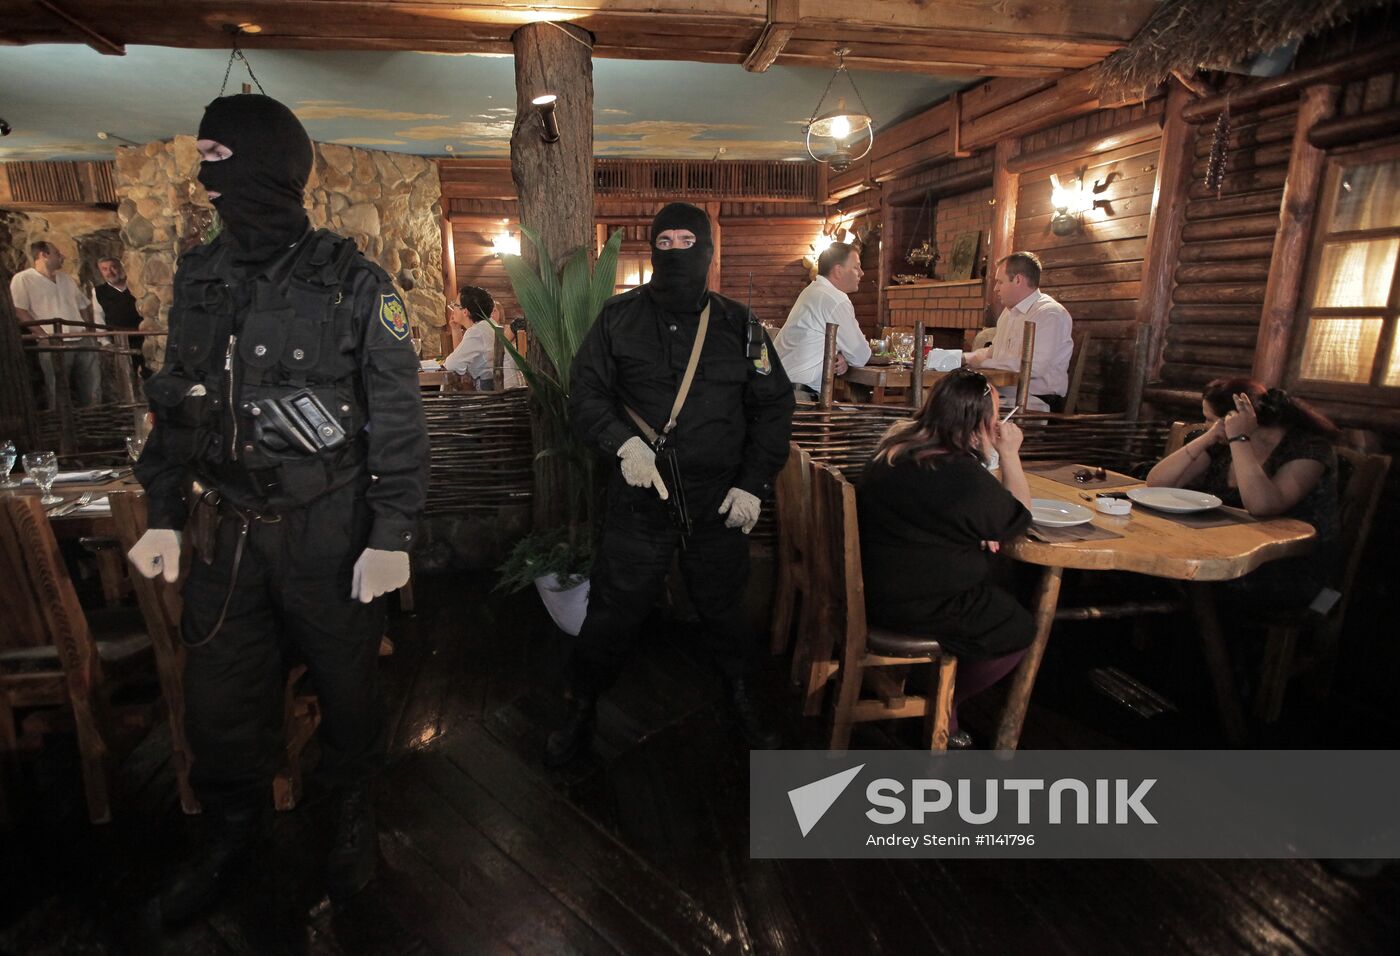 Drug control and migration inspection in Moscow night clubs